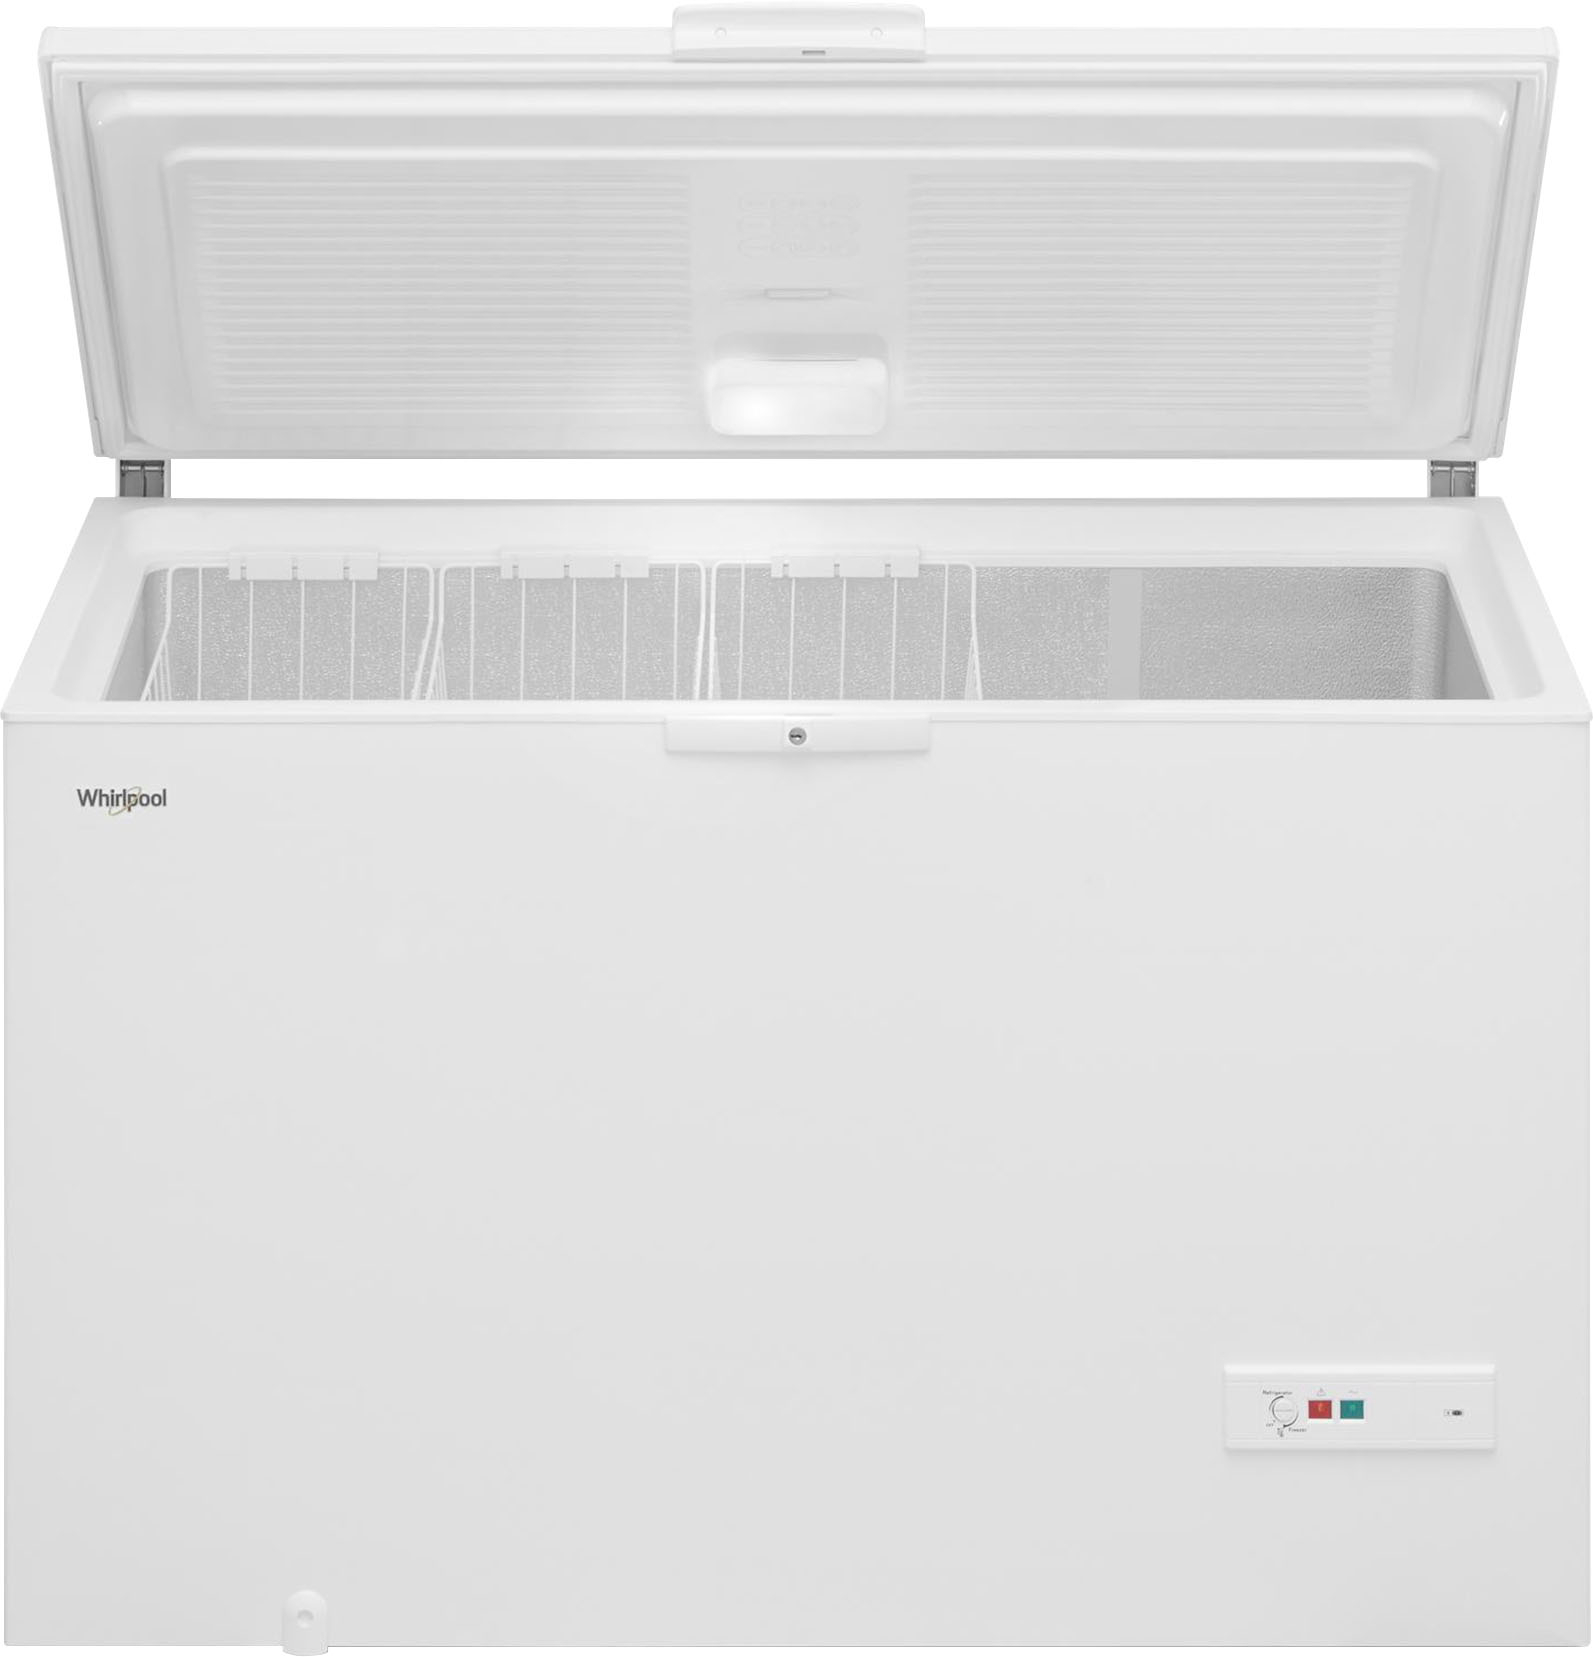 Left View: Whirlpool - 21.7 Cu. Ft. Chest Freezer - White